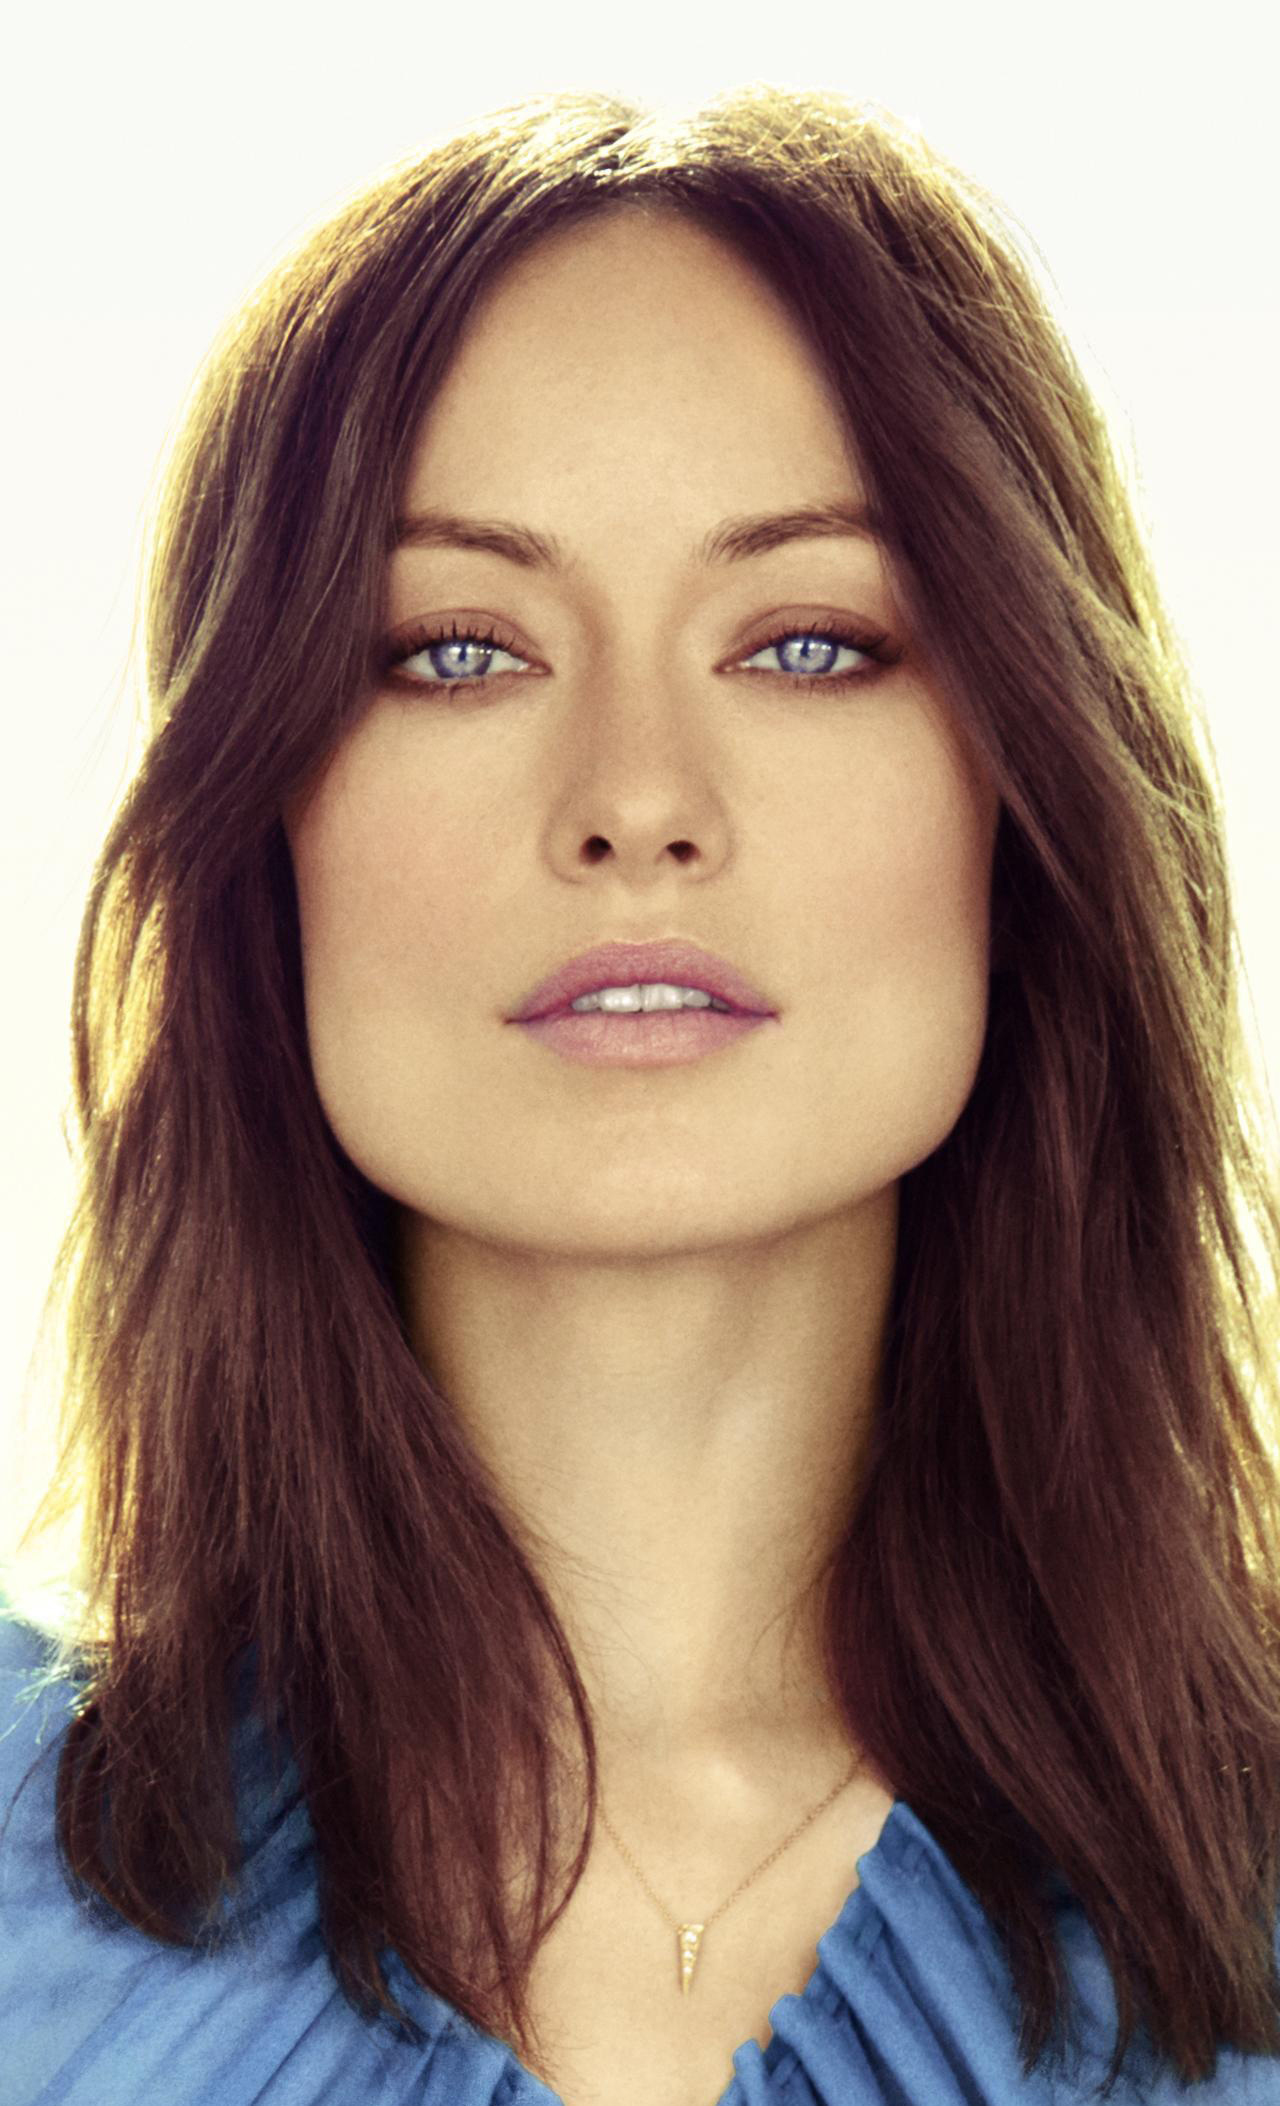 1280x2106 Download olivia wilde, stare, 2018 1280x2120 wallpaper, iphone 6 plus, 1280x2120 hd image, background, 7828